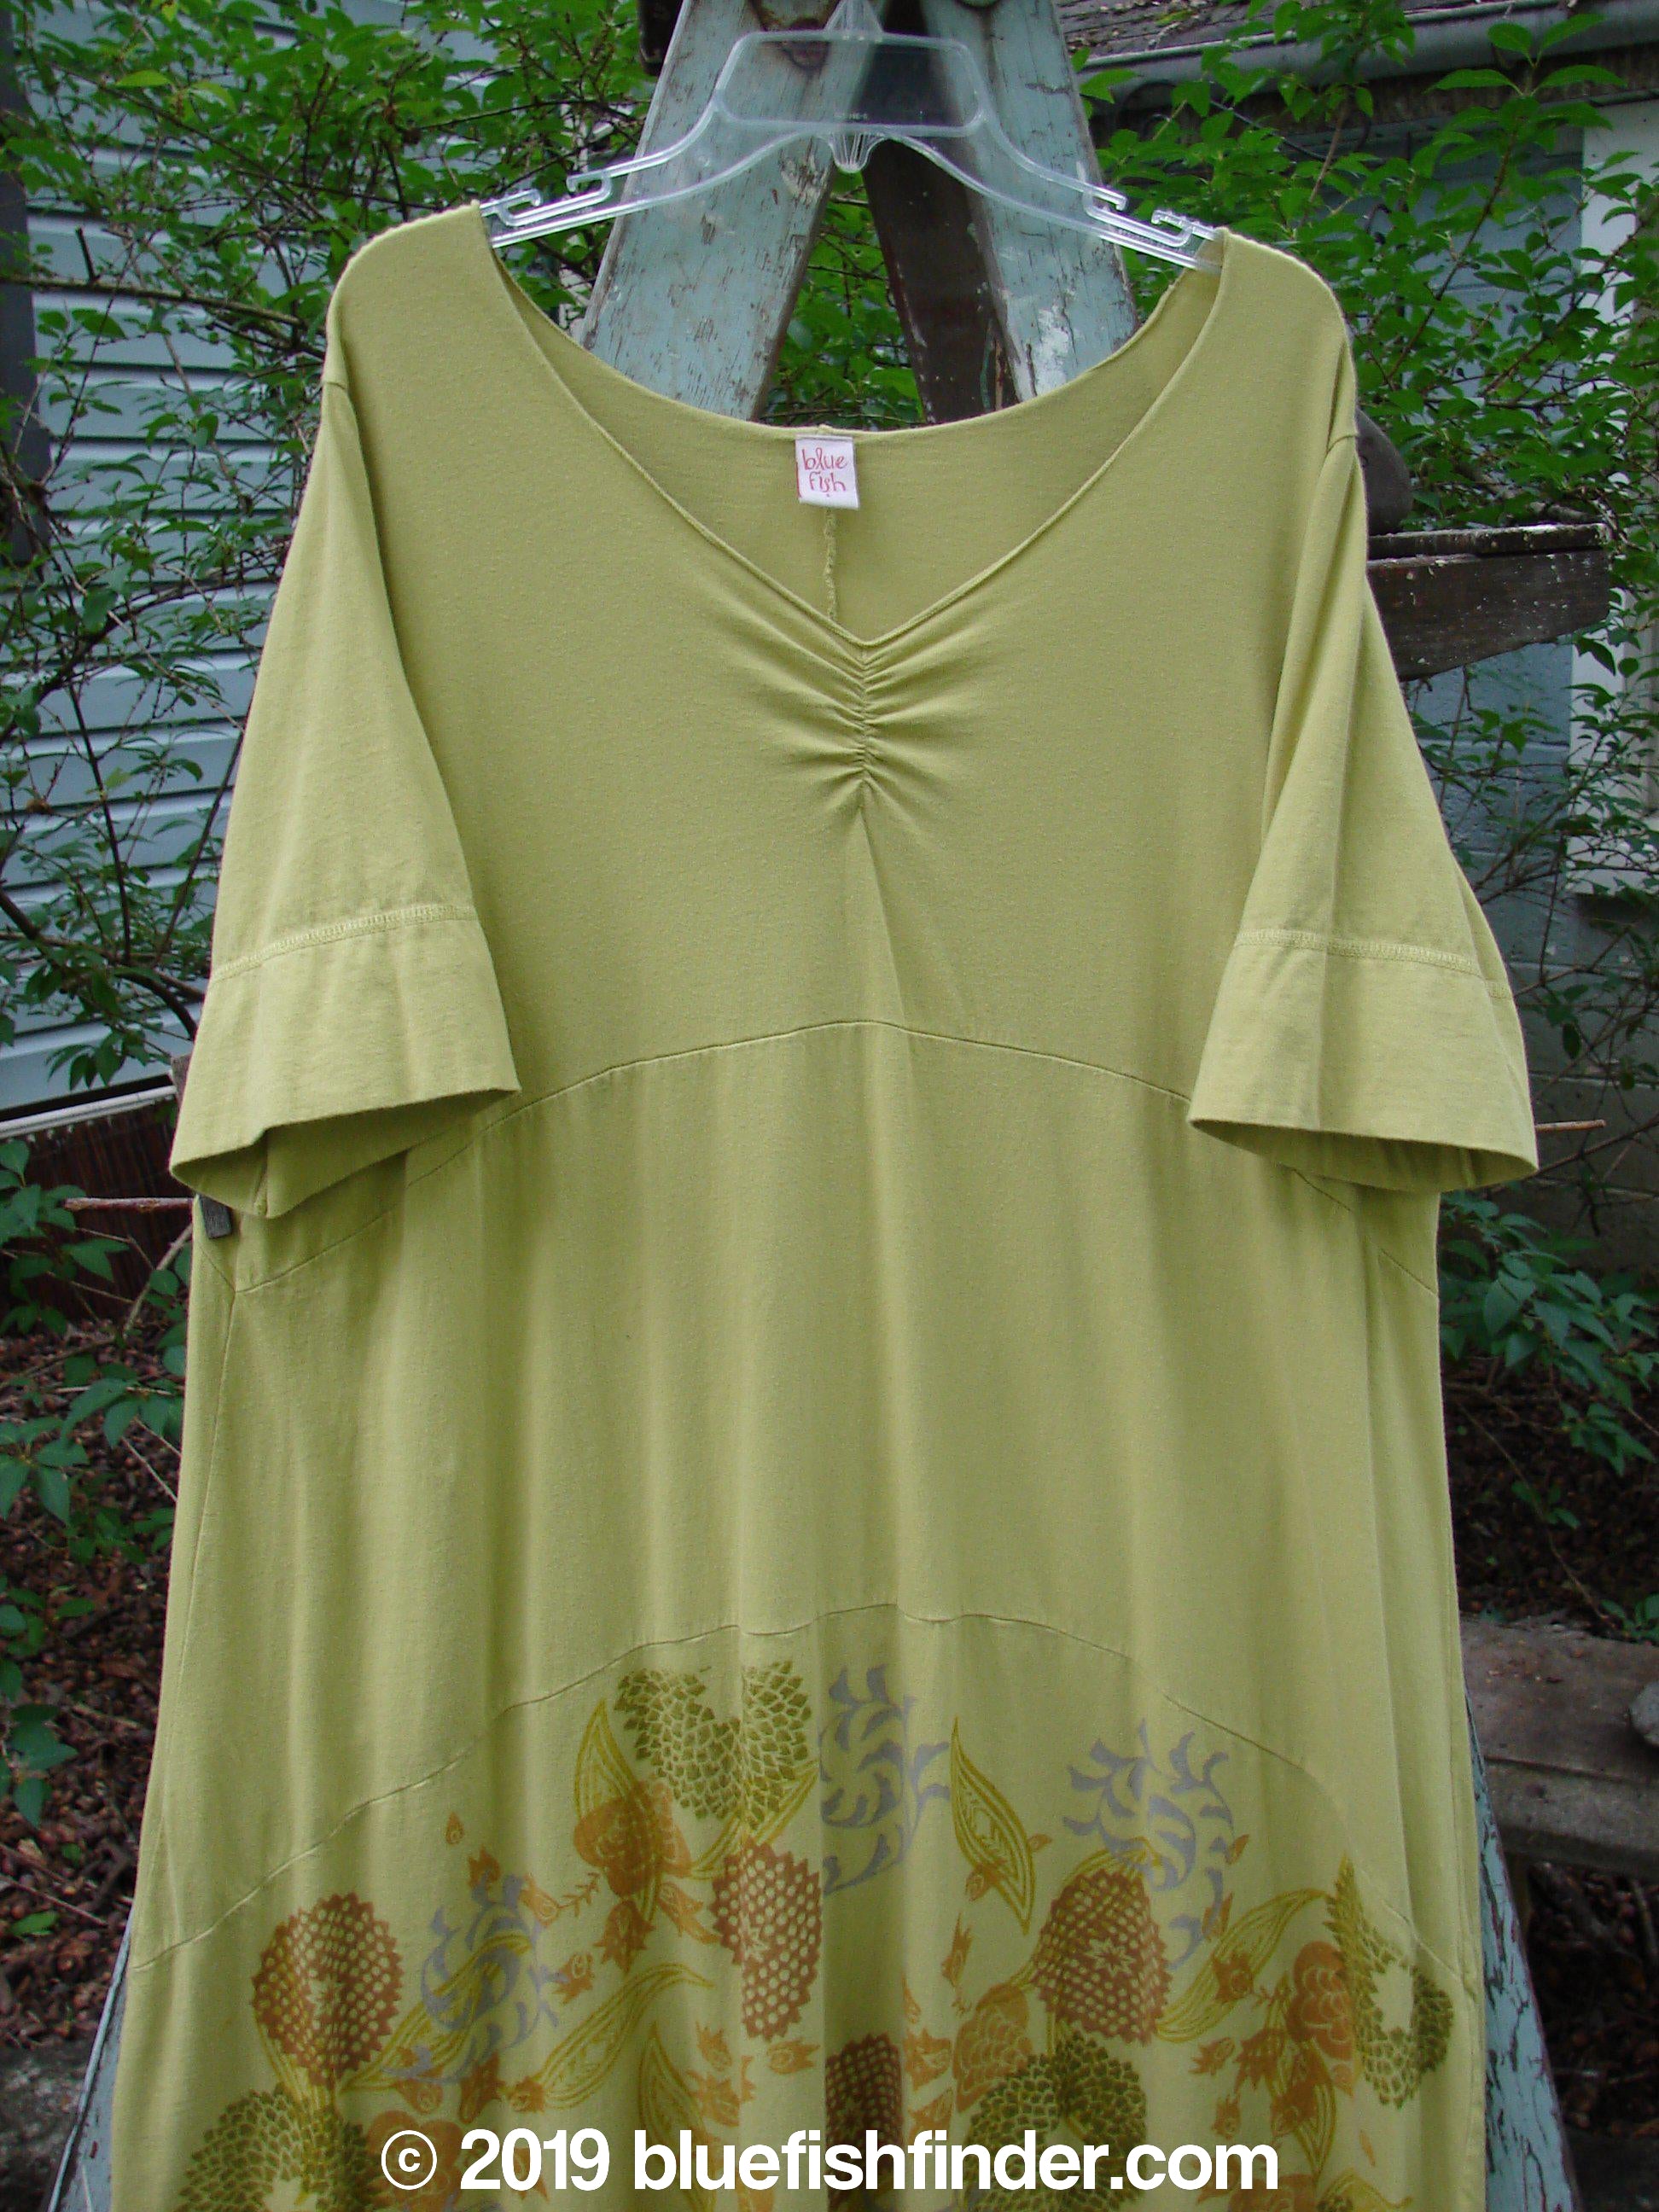 A green shirt with a floral design on it, part of the Barclay Gather Sectional Banded Petal Dress Whimsical Garden collection. Made from medium weight organic cotton, this dress features a lovely dippy side varying hemline, continuous downward shaped horizontal panels, and a sweet upper front vertical gather. It also has a V-shaped neckline, banded lower short sleeves, a hem bell accent, and a repeated banded circumference. The dress has a sweeping A-line shape and is adorned in the whimsical garden theme.